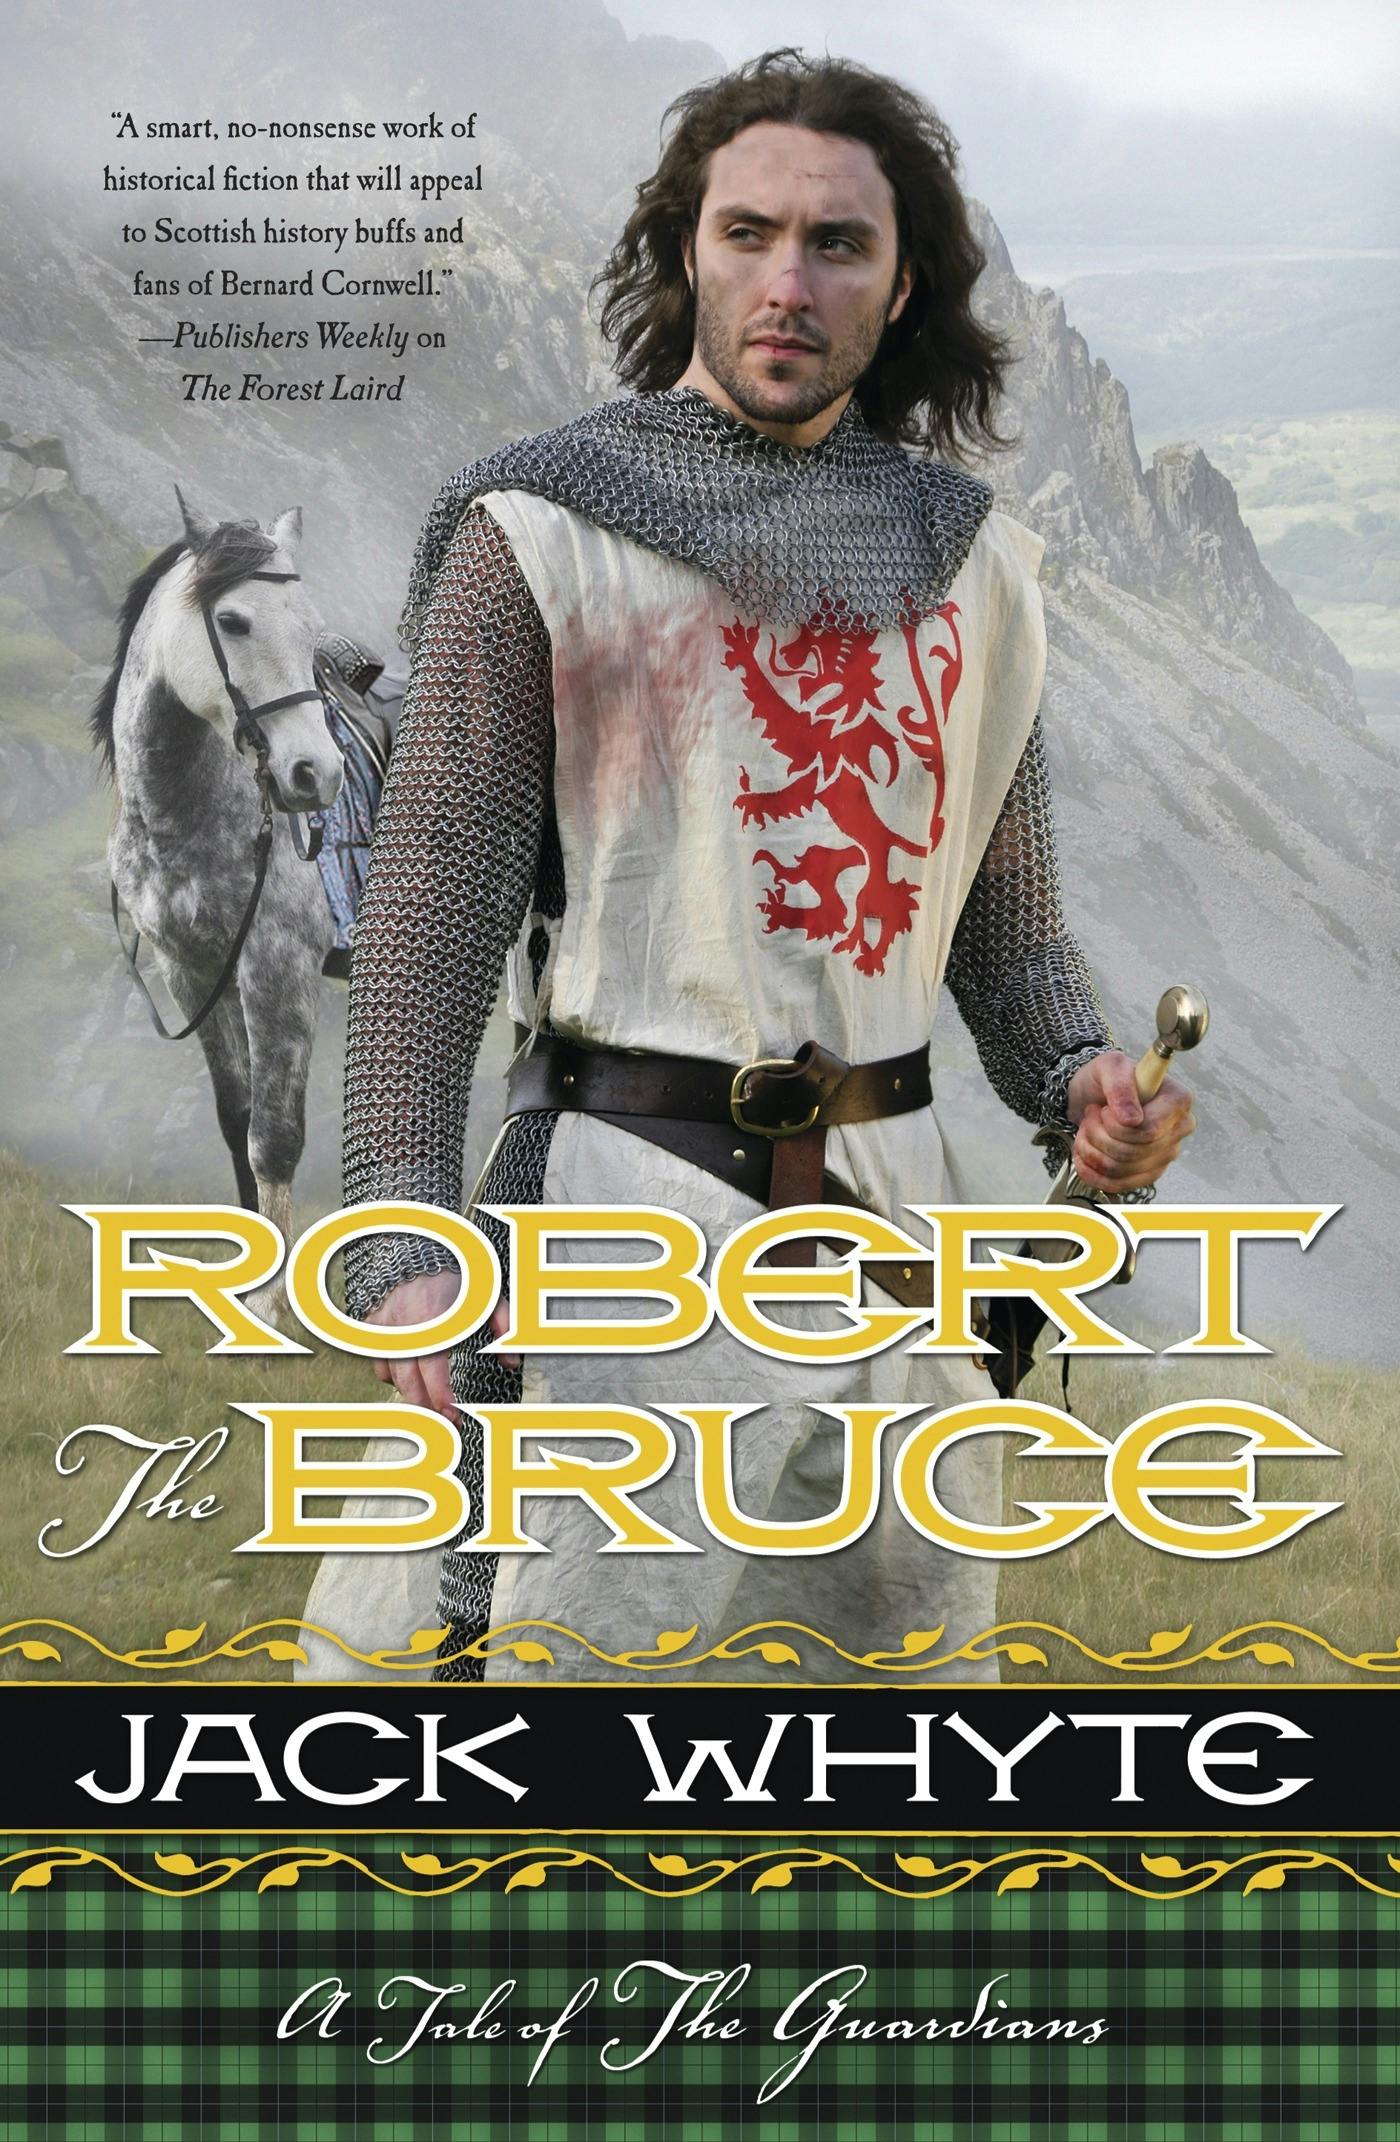 Cover for the book titled as: Robert the Bruce